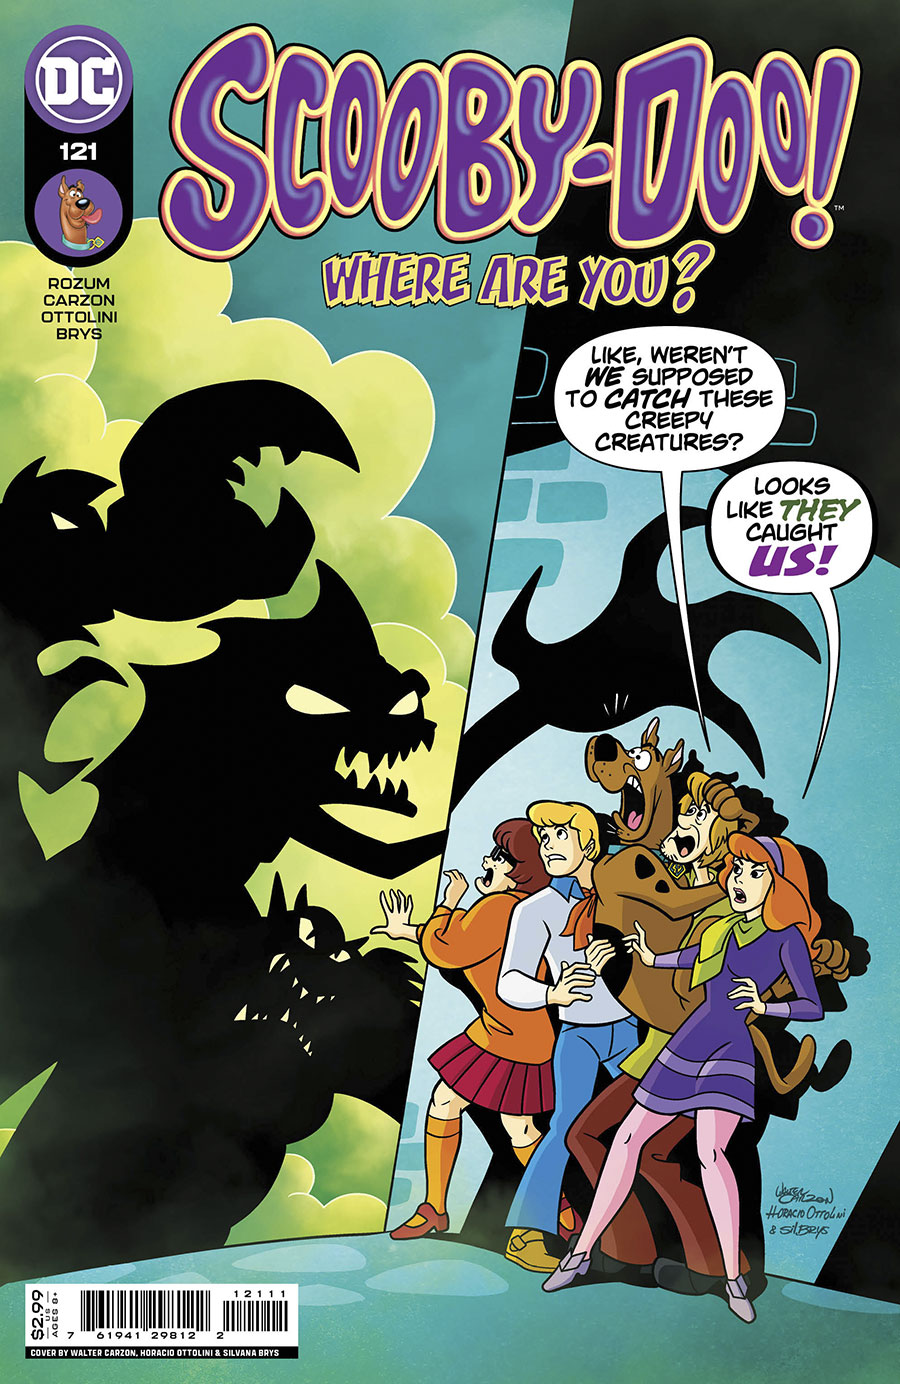 Scooby-Doo Where Are You #121